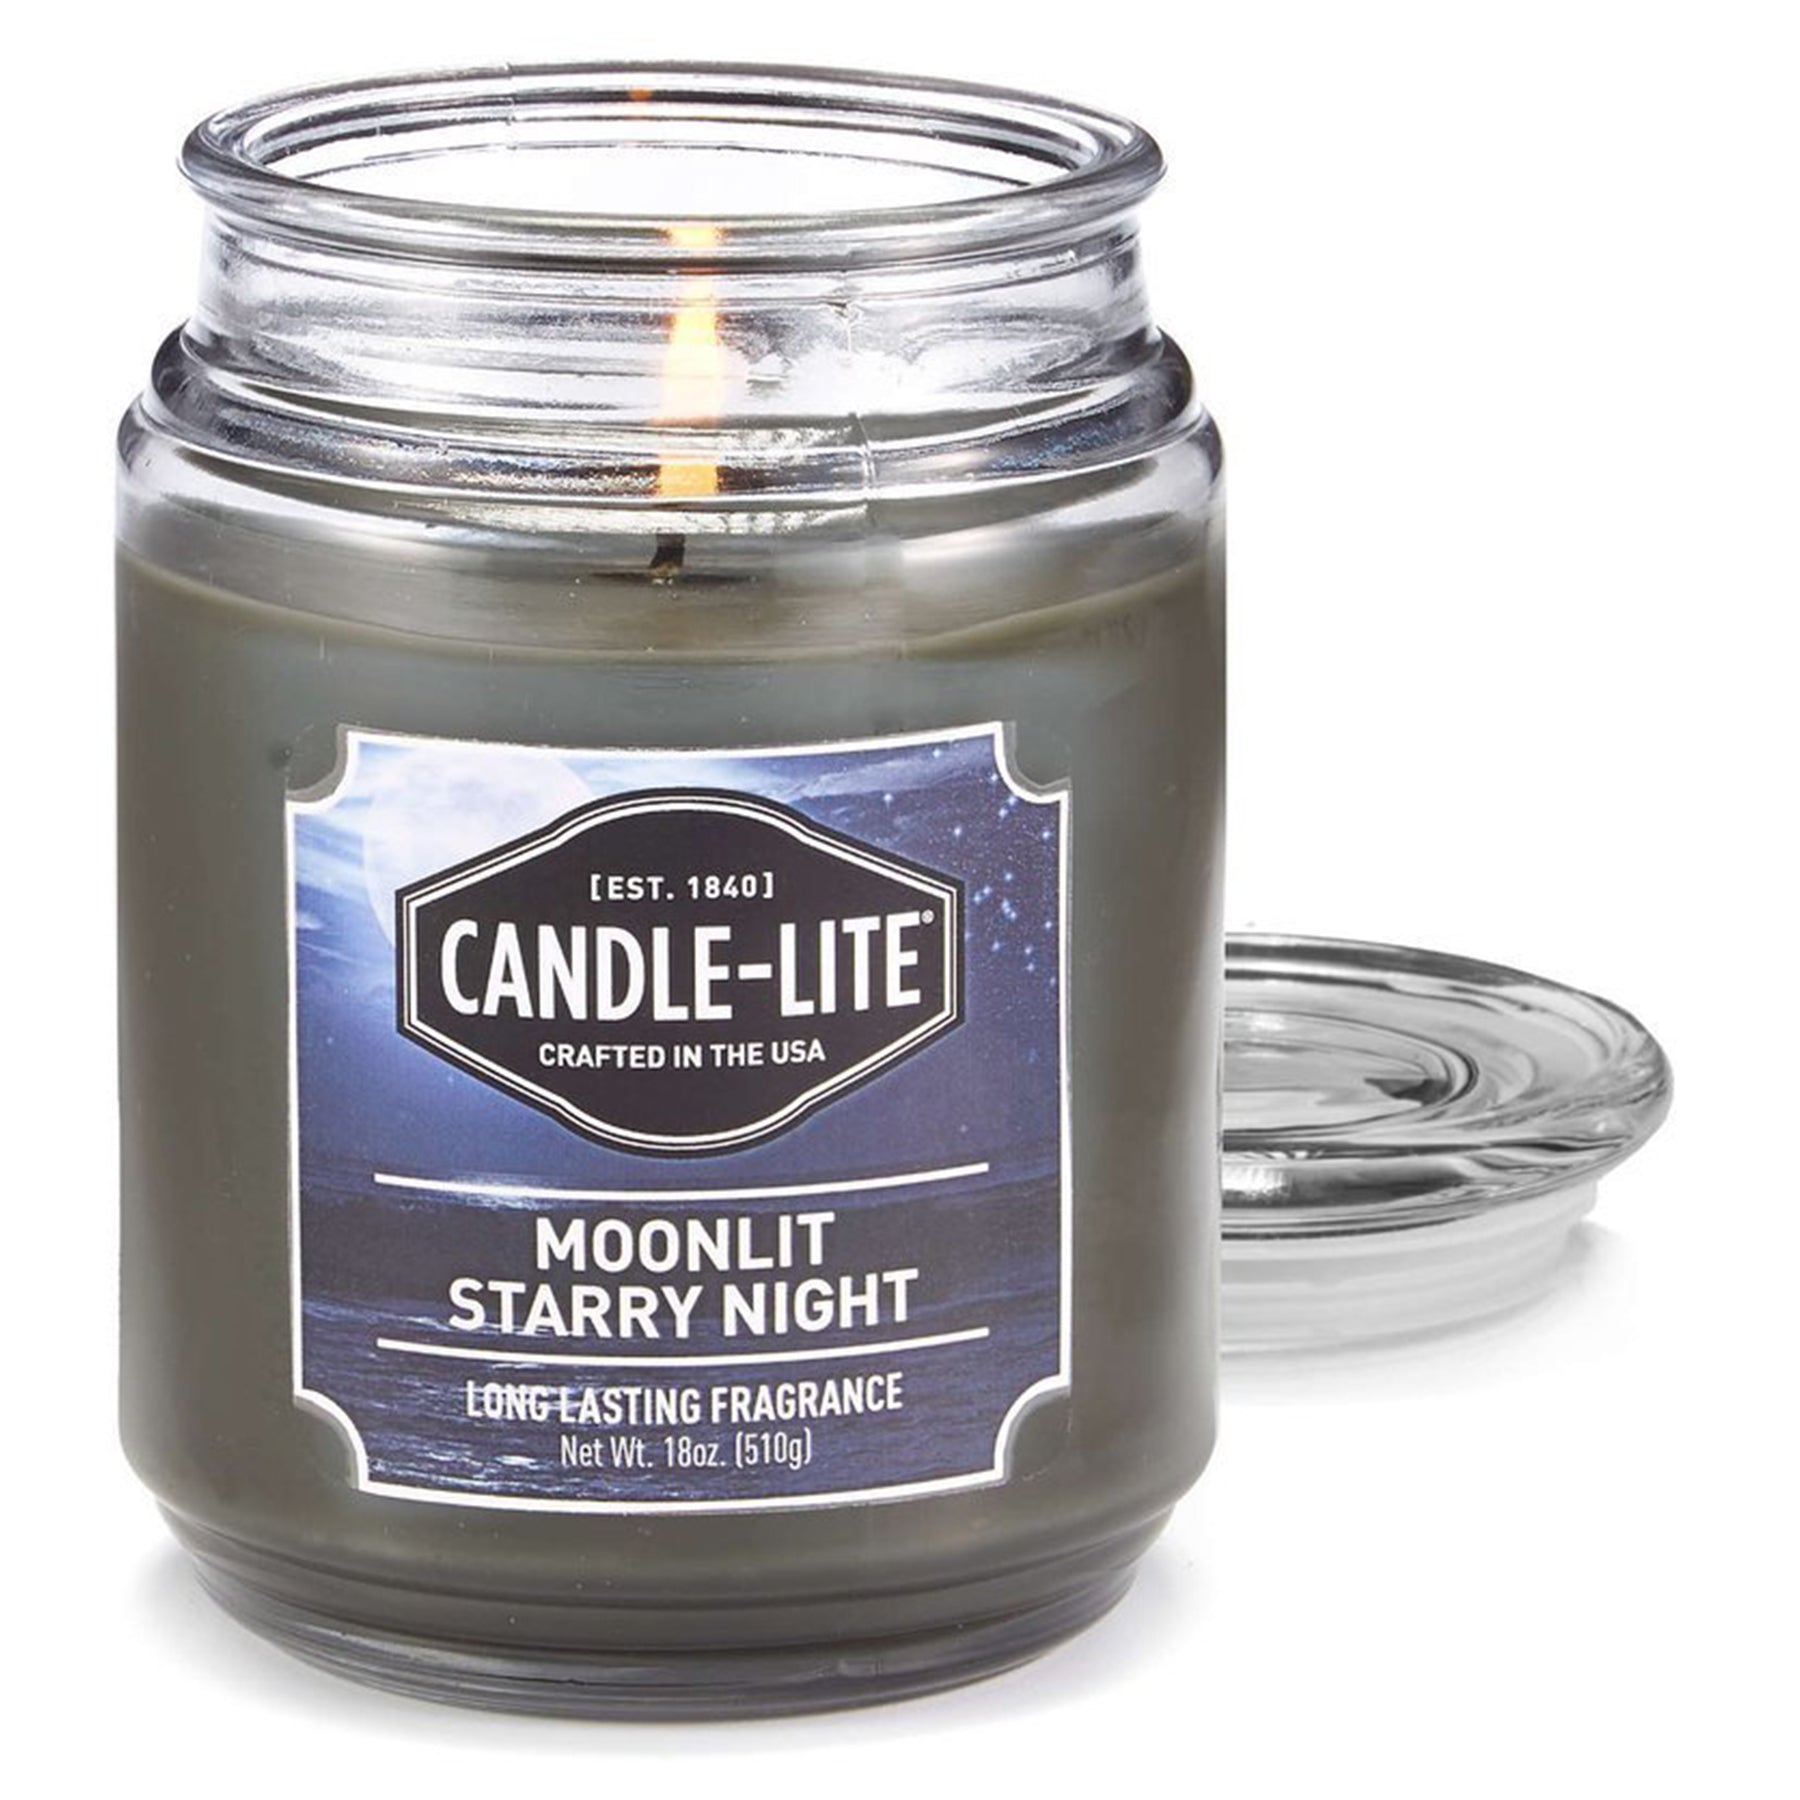 Candle with Fragrance - Moonlit starry night